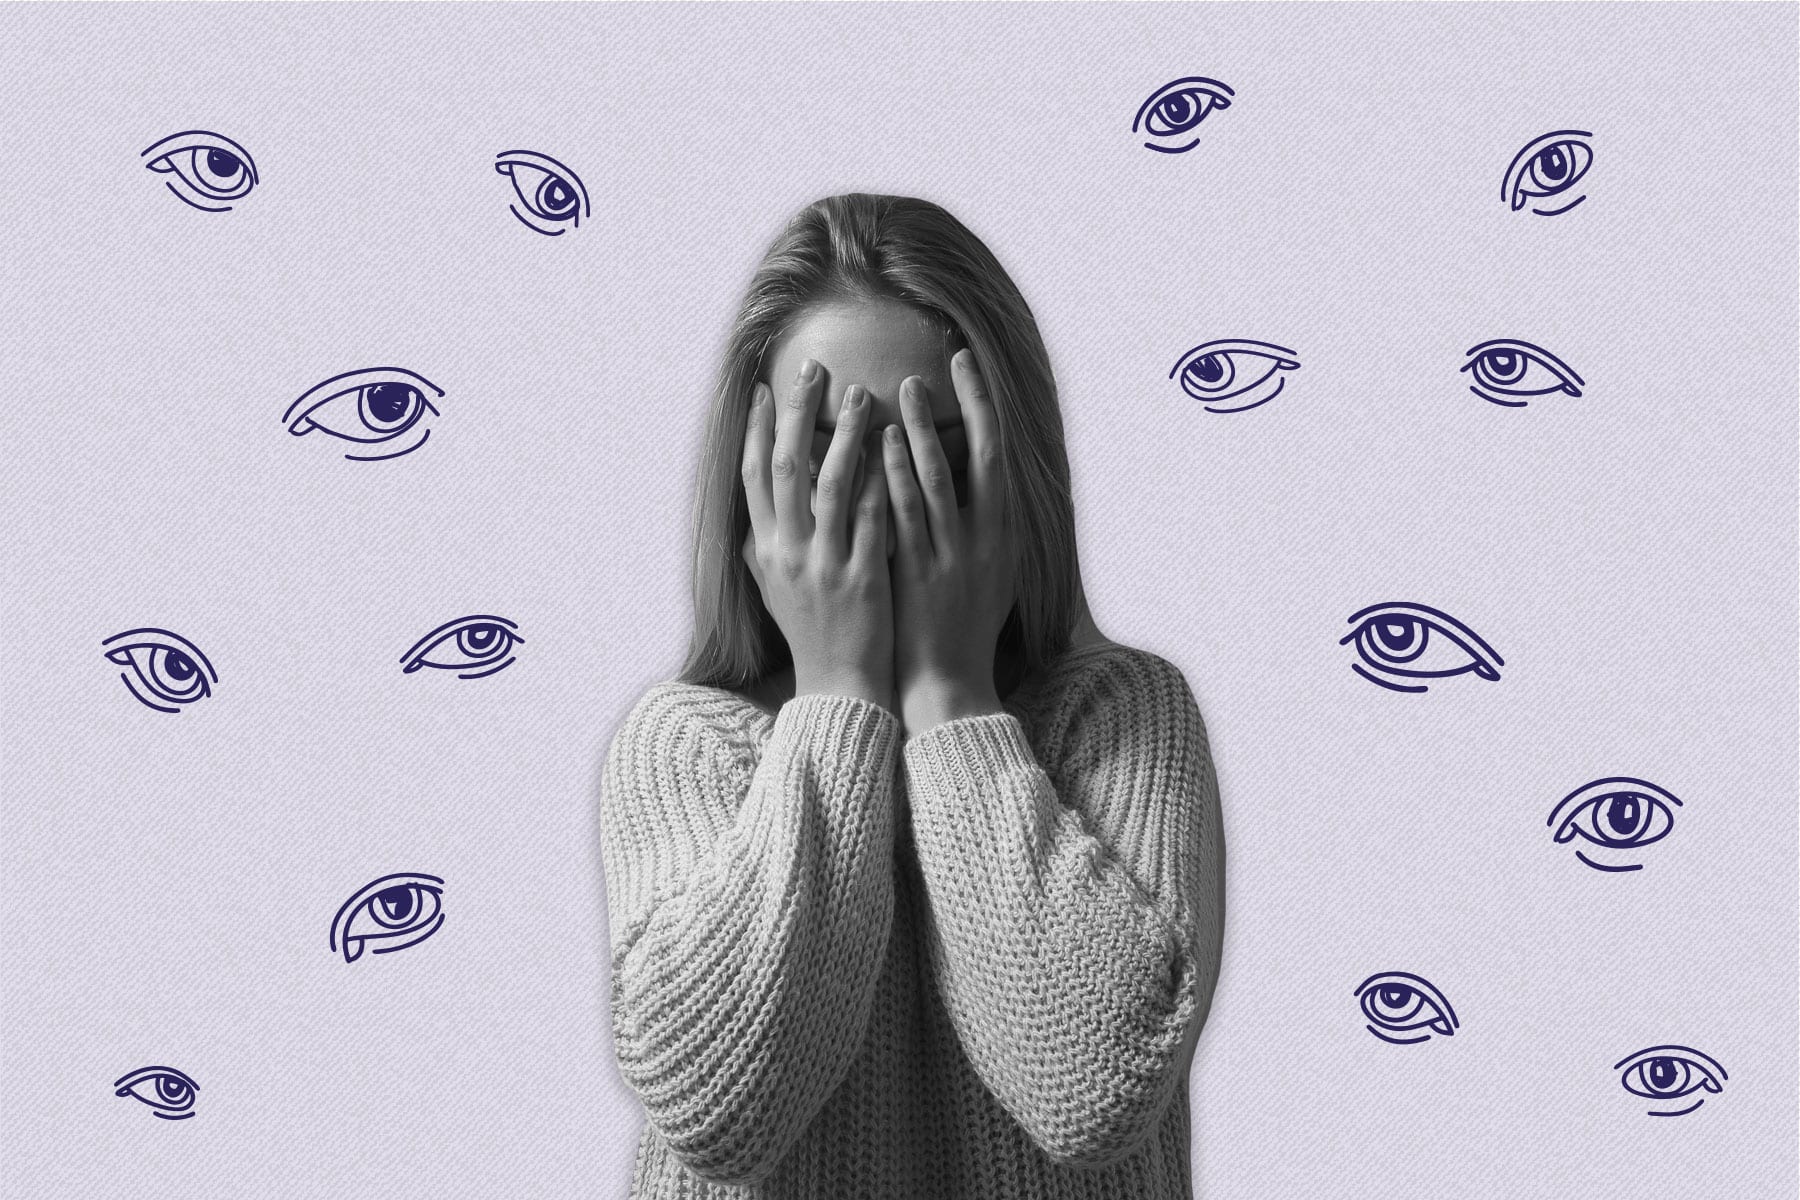 A photo illustration of a woman suffering social anxiety.